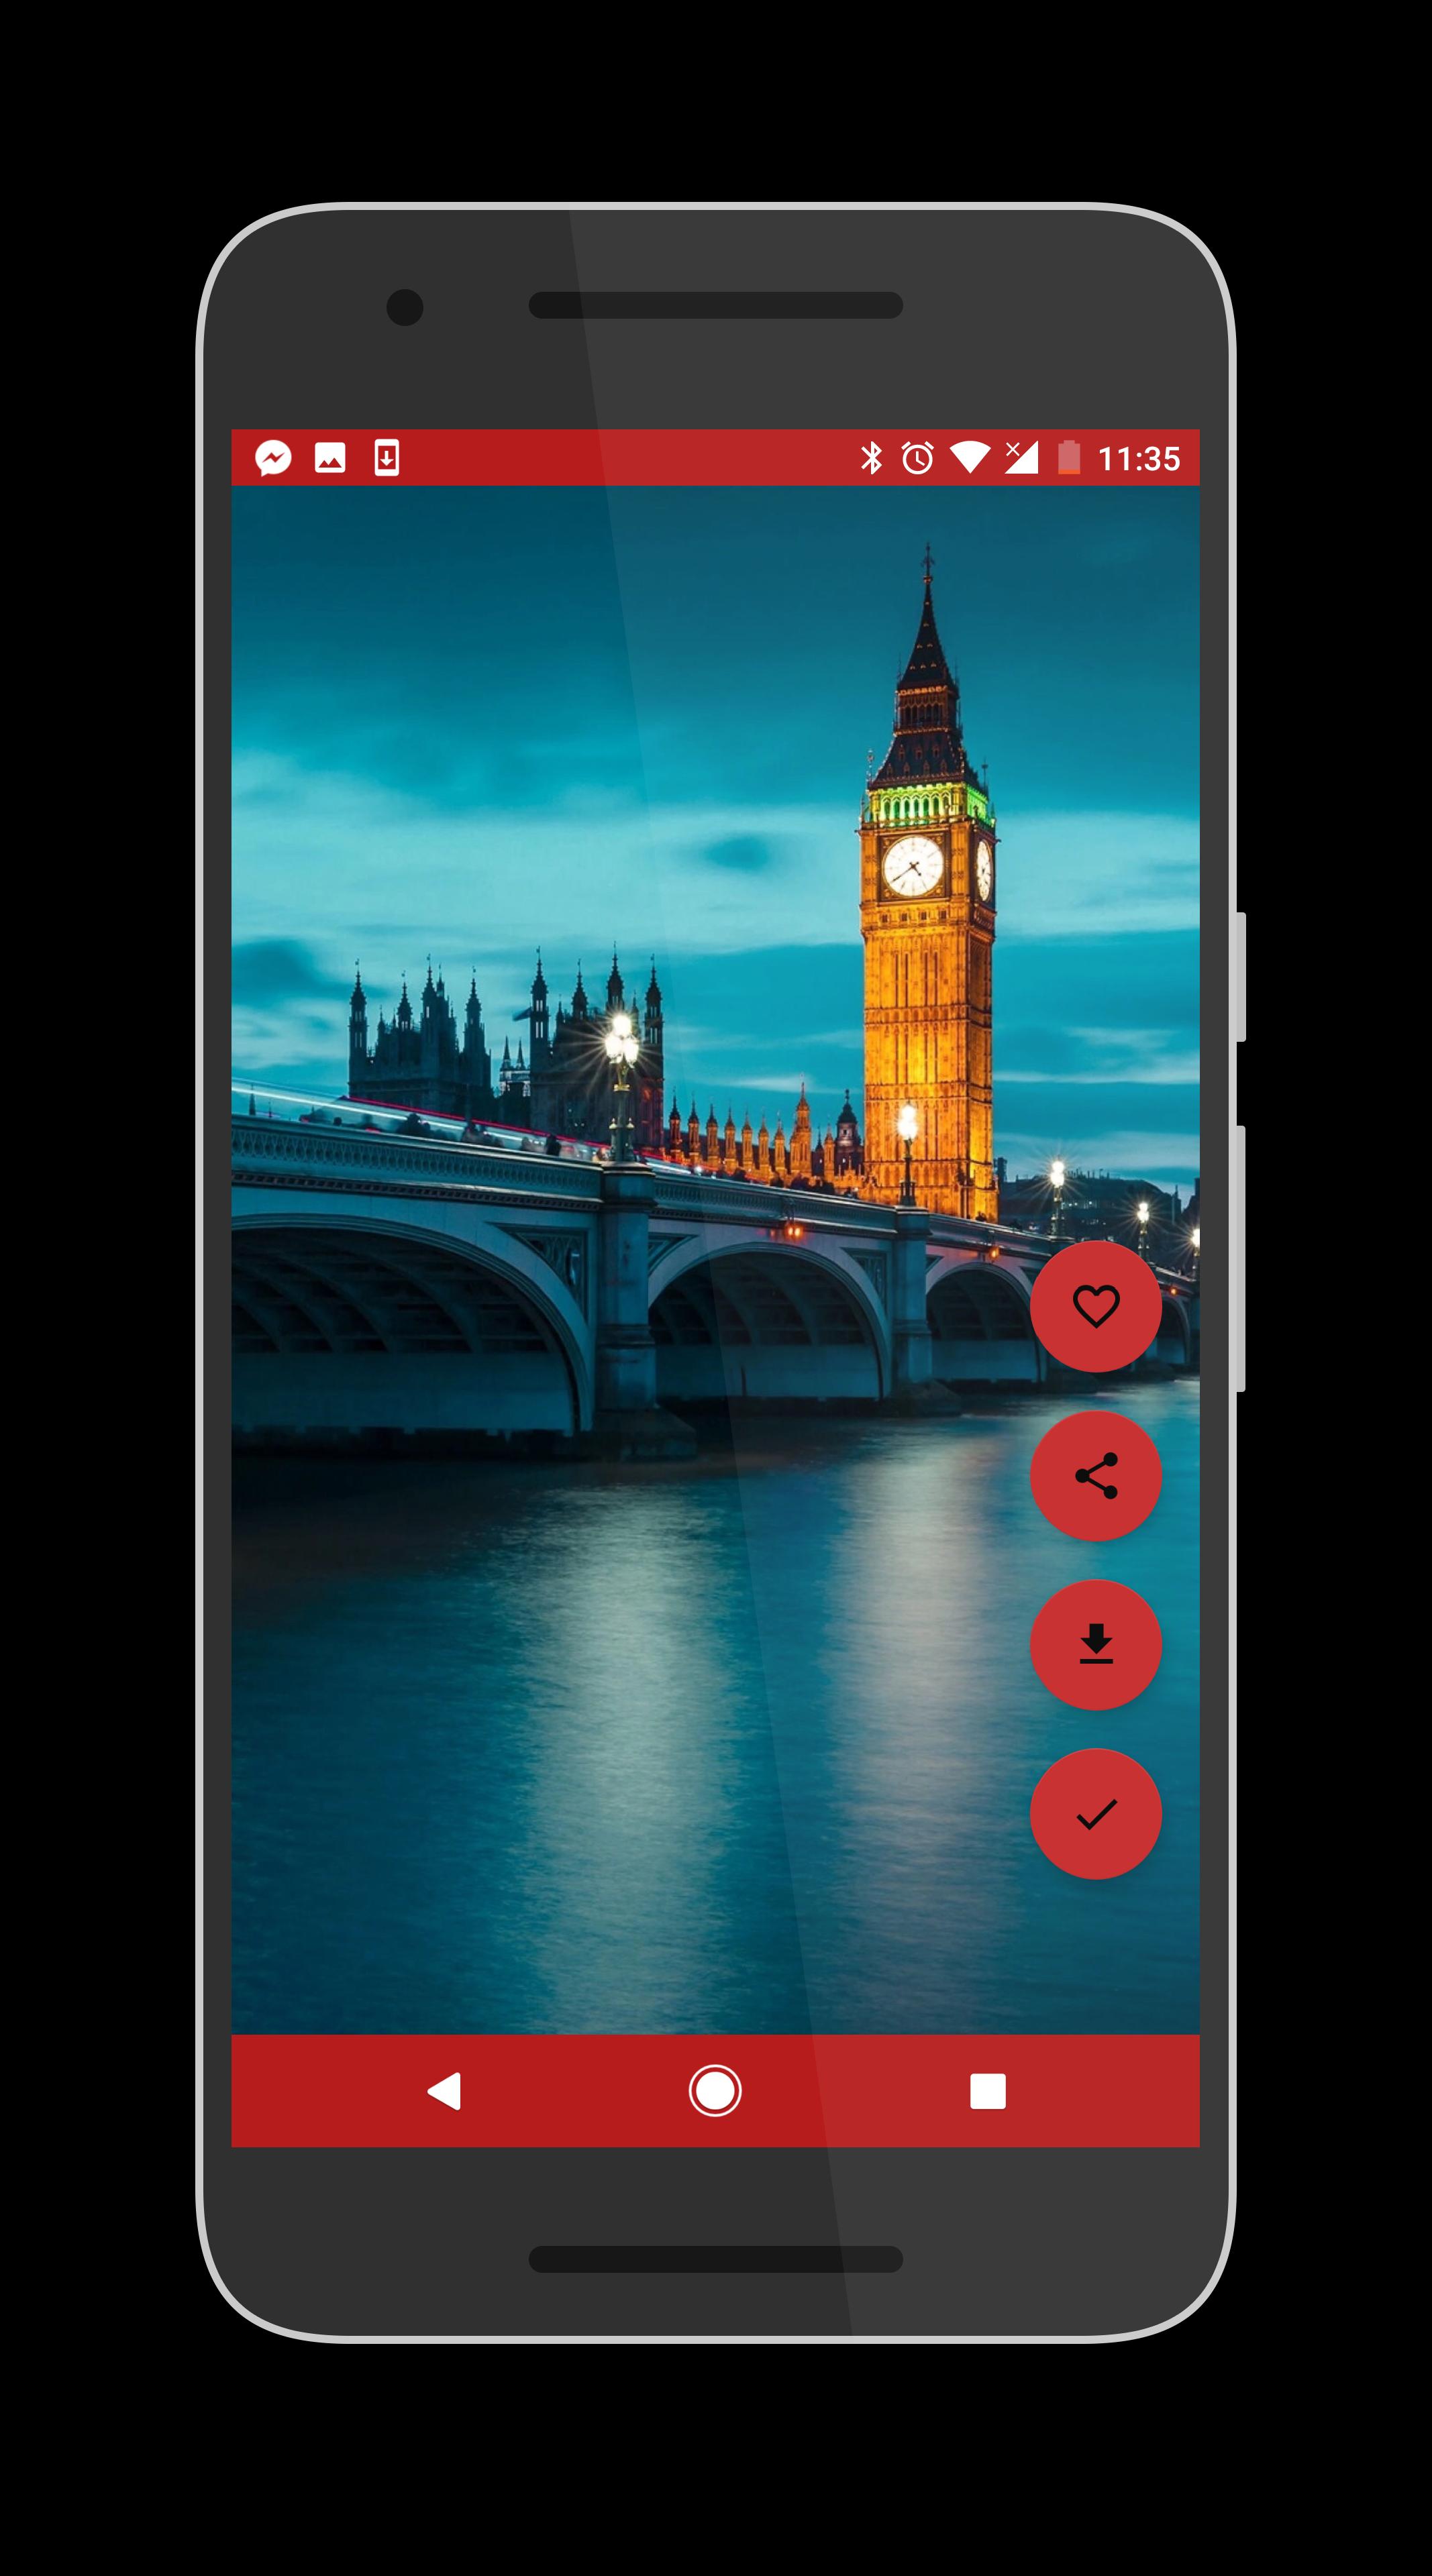 Portraits Hd 4k Wallpapers For Android Apk Download Images, Photos, Reviews